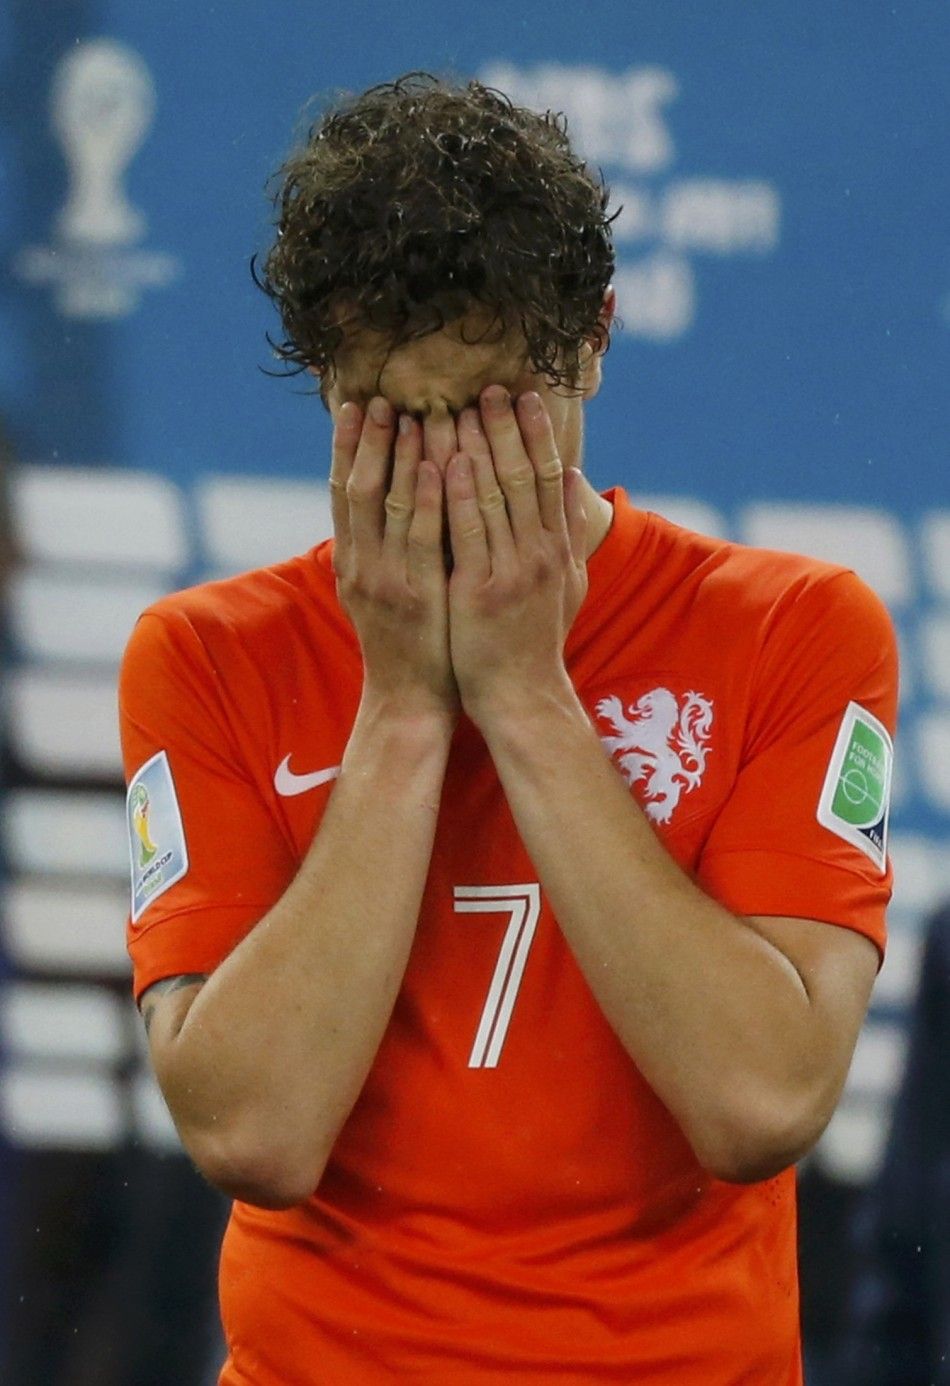 Daryl Janmaat of the Netherlands